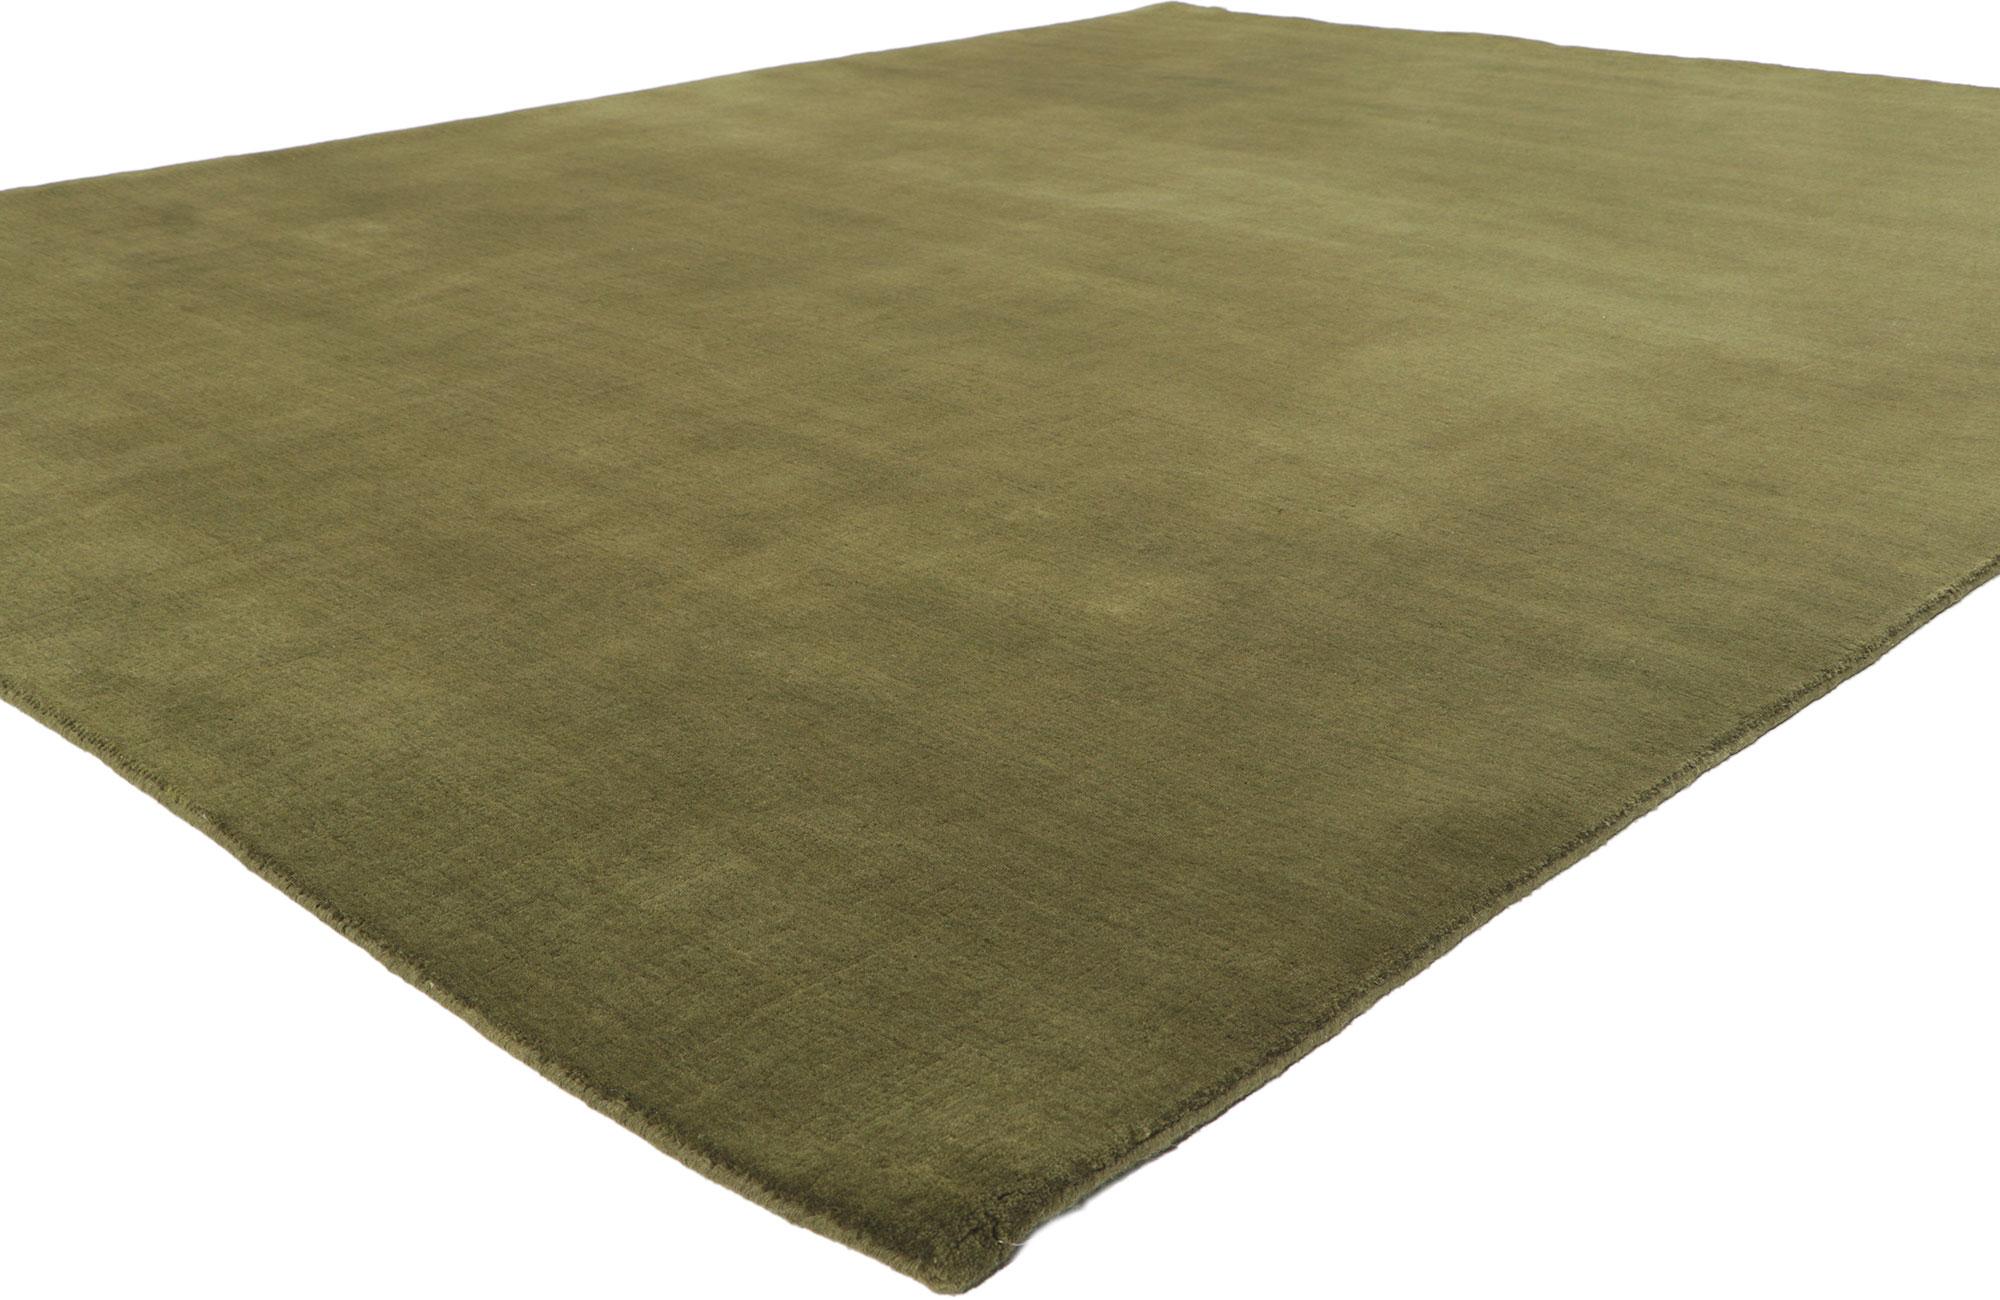 30926 New Moss-Olive Green Modern Rug, 07'11 x 09'11. Implementing biophilia with subdued ornamentation, this modern area rug is a captivating vision of woven beauty. The lavish texture and earthy green colorway woven into this piece work together